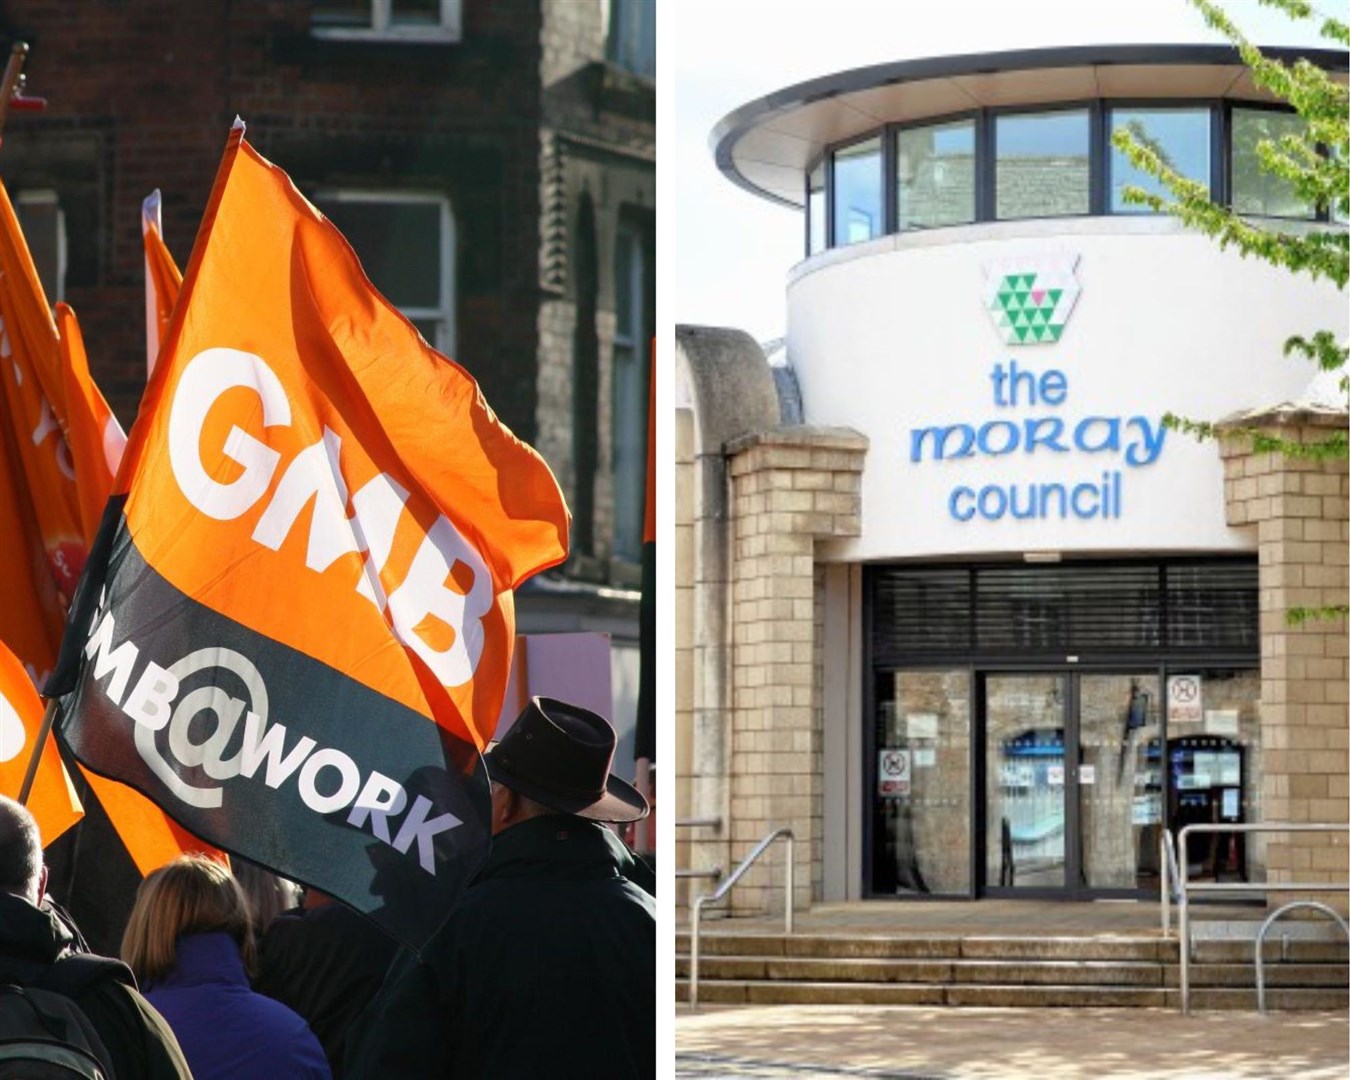 GMB Scotland fought for the rise and said other councils across Scotland must follow Moray's lead.